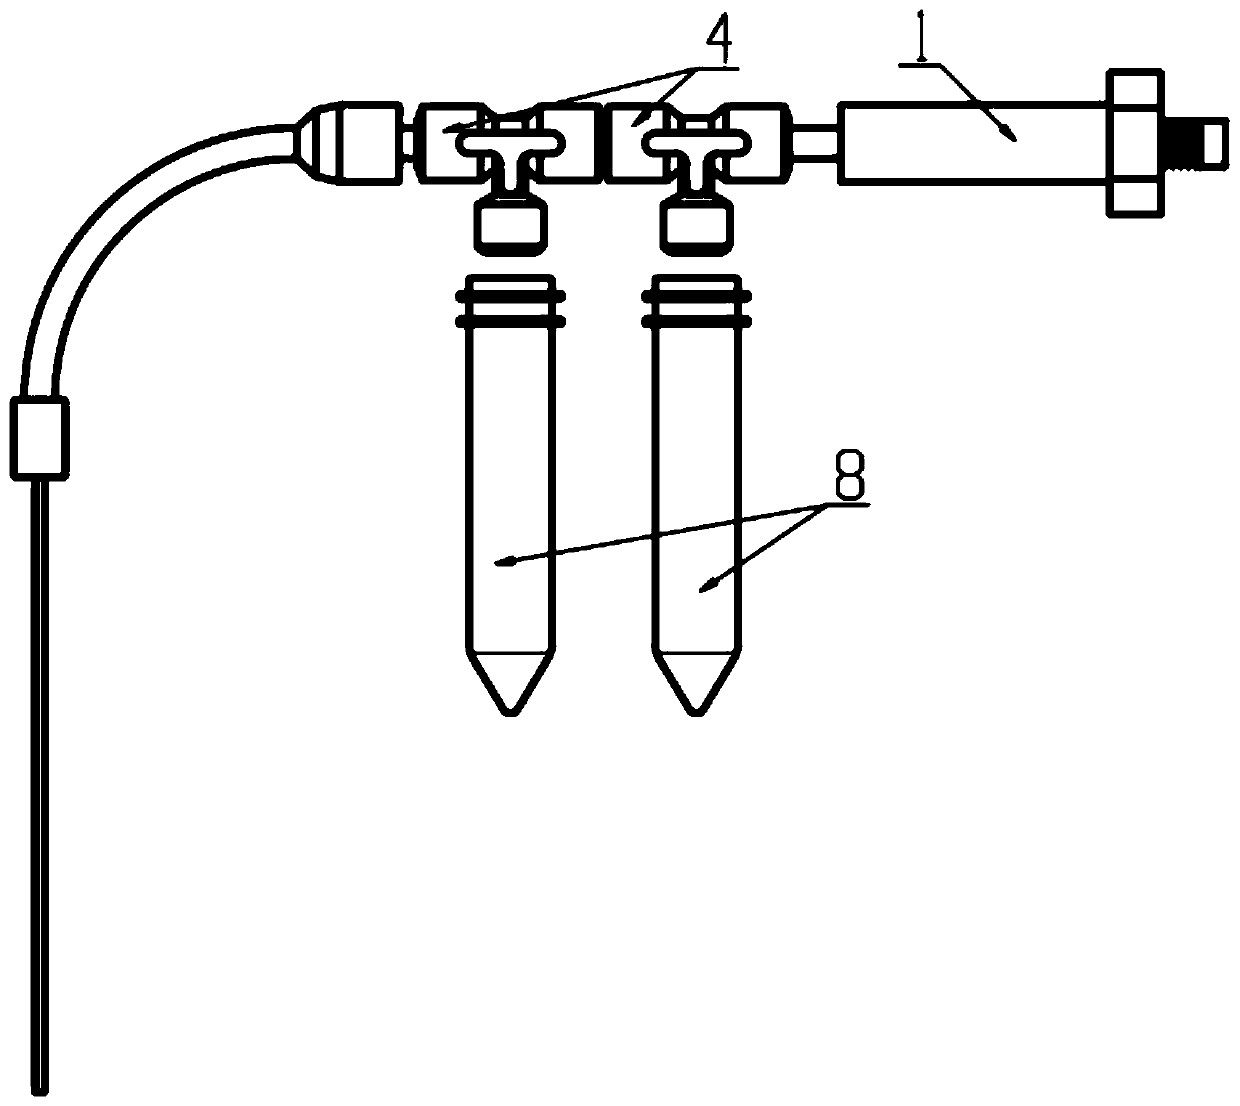 Liquid taking and separating device